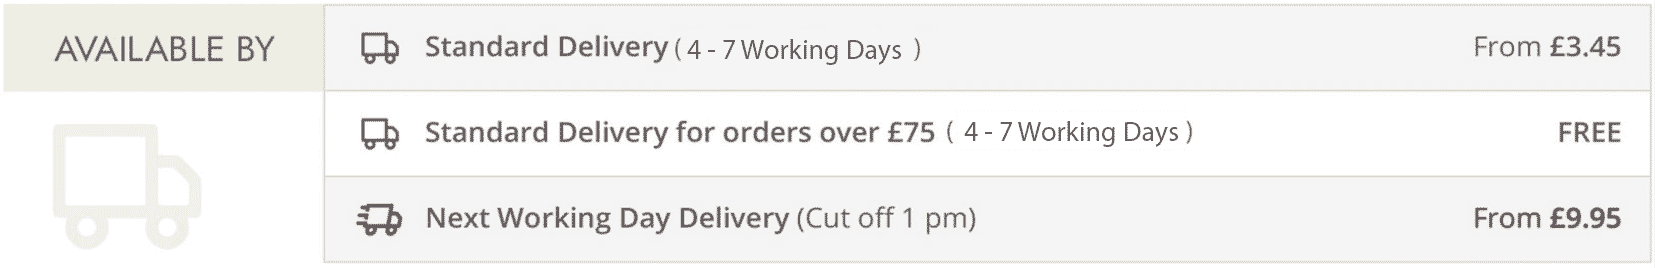 Delivery times 4 - 7 days